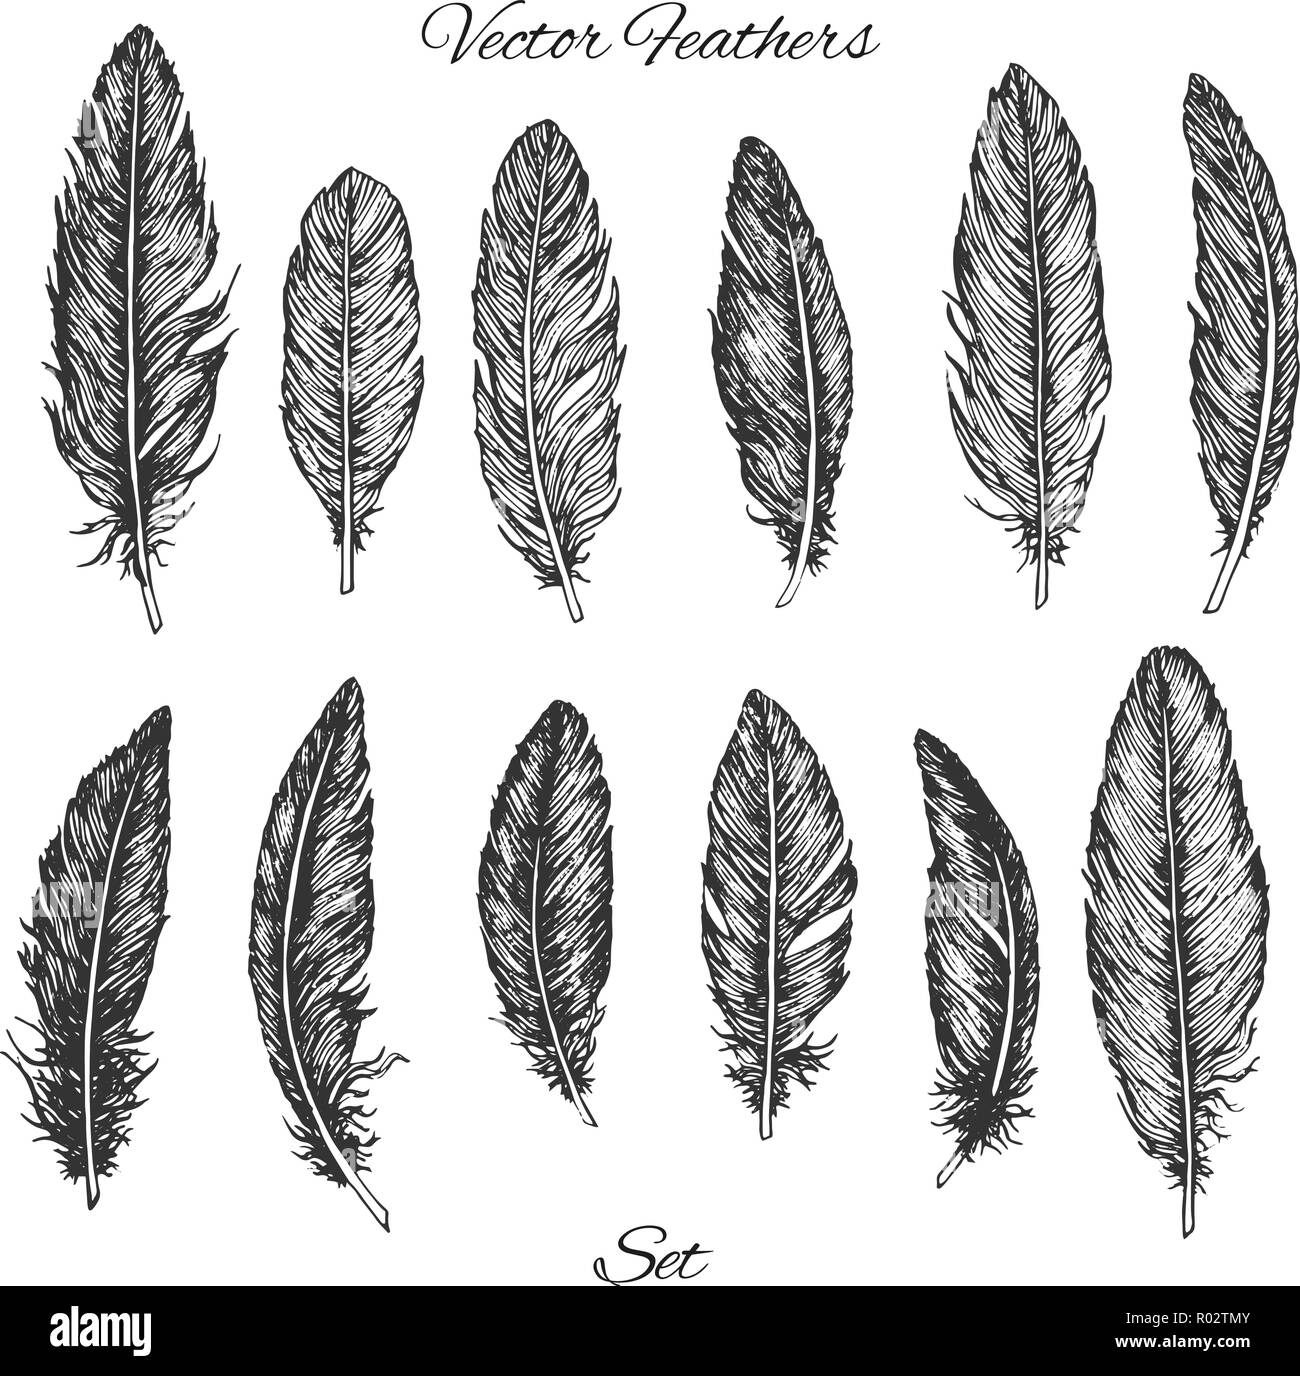 Feathers set vector illustration. Cartoon isolated bright exotic birds  plume collection, curve feathers with colorful abstract patterns from wings  or tail of flying wild animal, different plumages Stock Vector